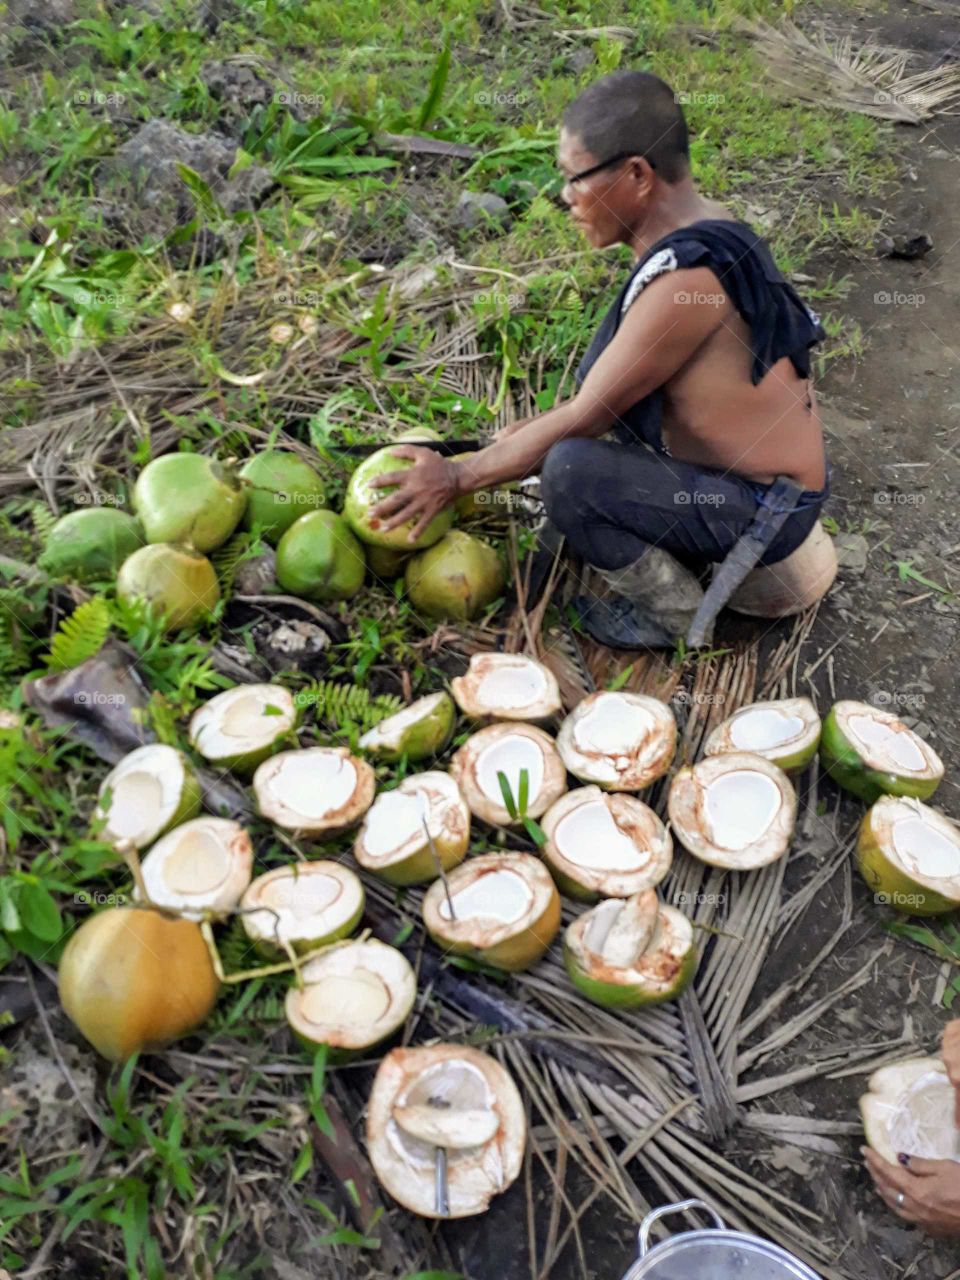 Buko or young coconut can be eaten straight from the shell. The fresh buko juice is a good healthy refreshment.